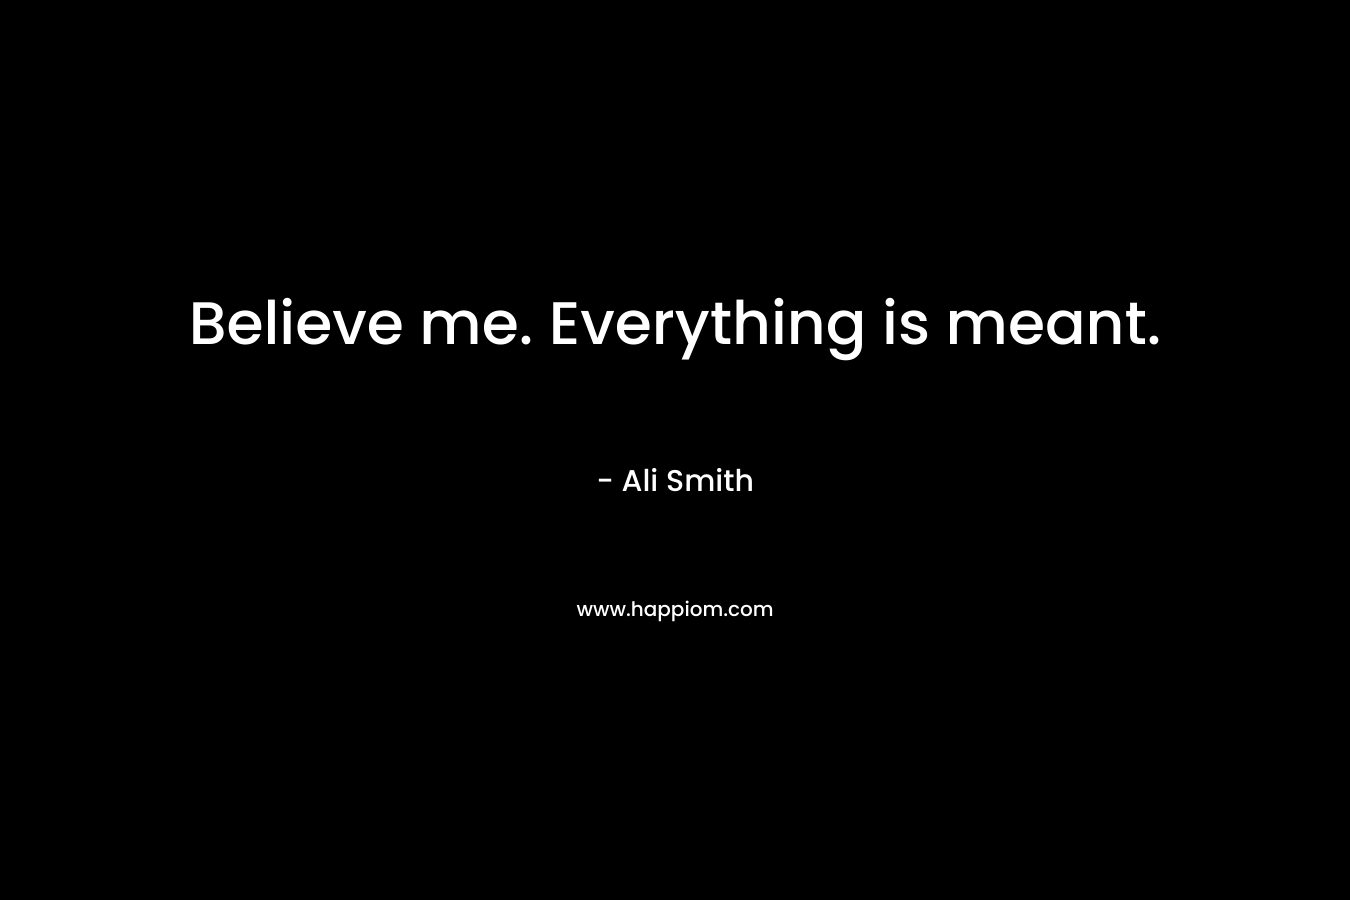 Believe me. Everything is meant.